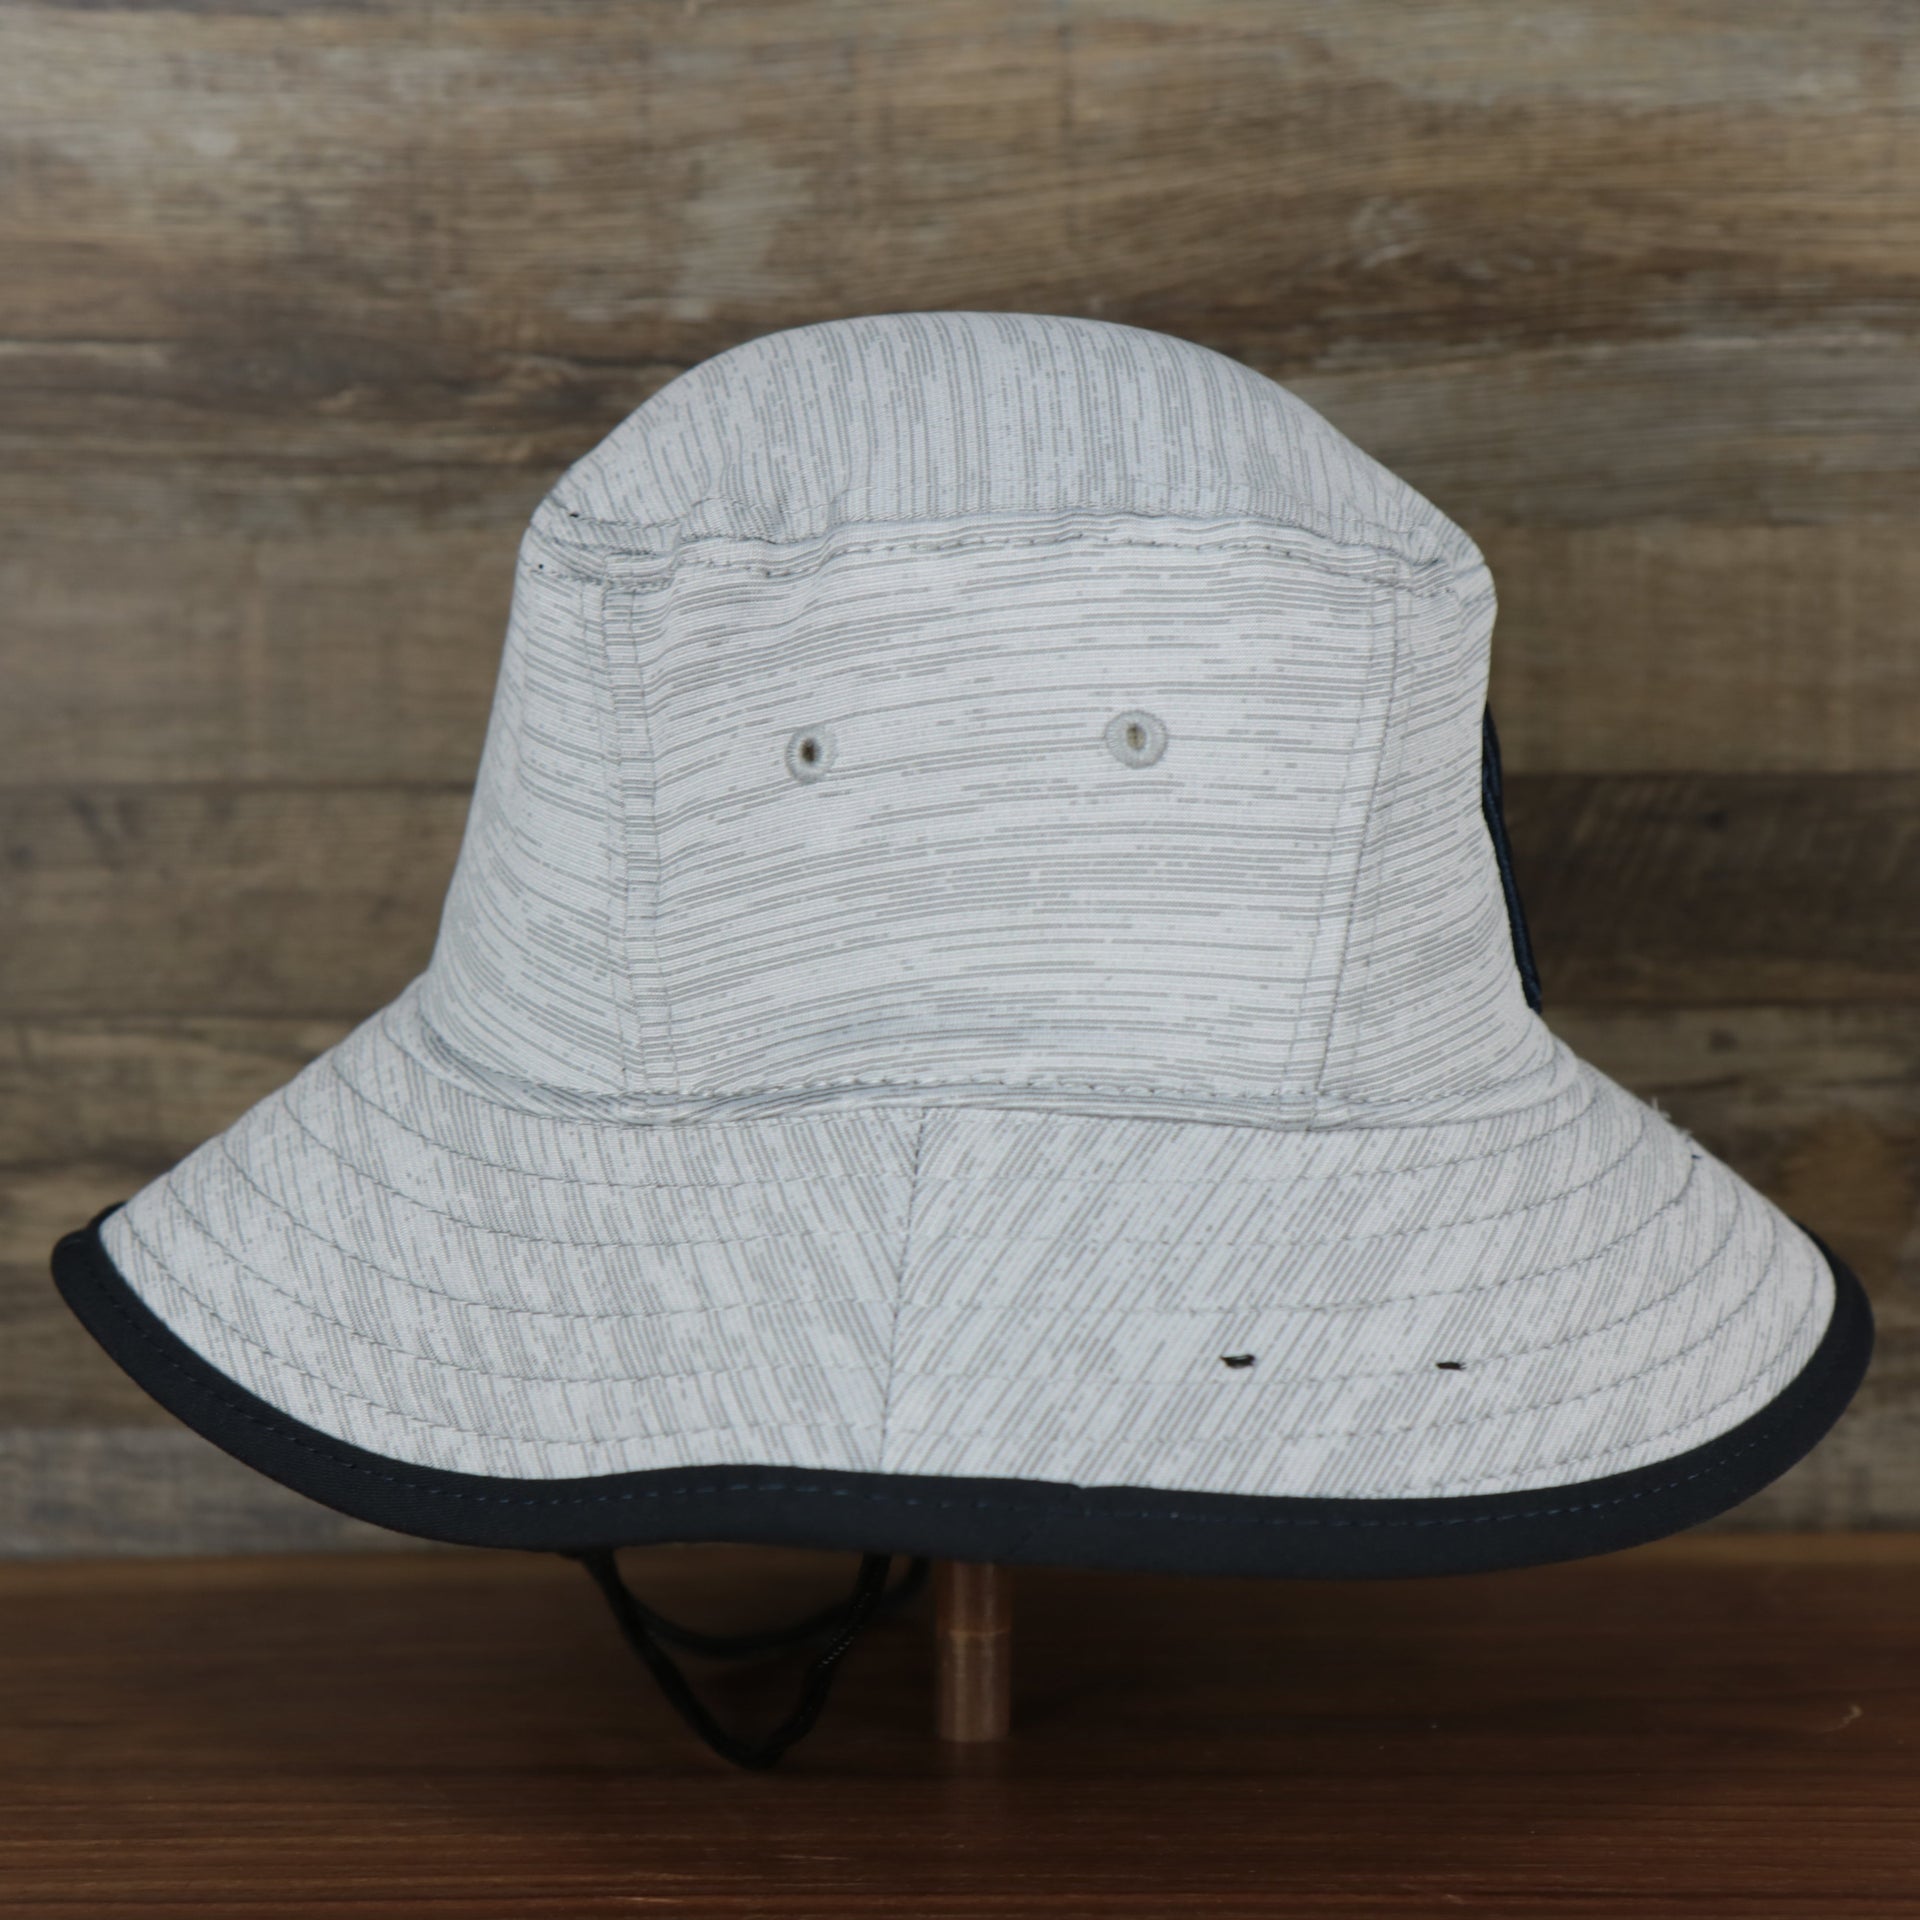 The wearer's right on the New York Yankees New Era Bucket Hat